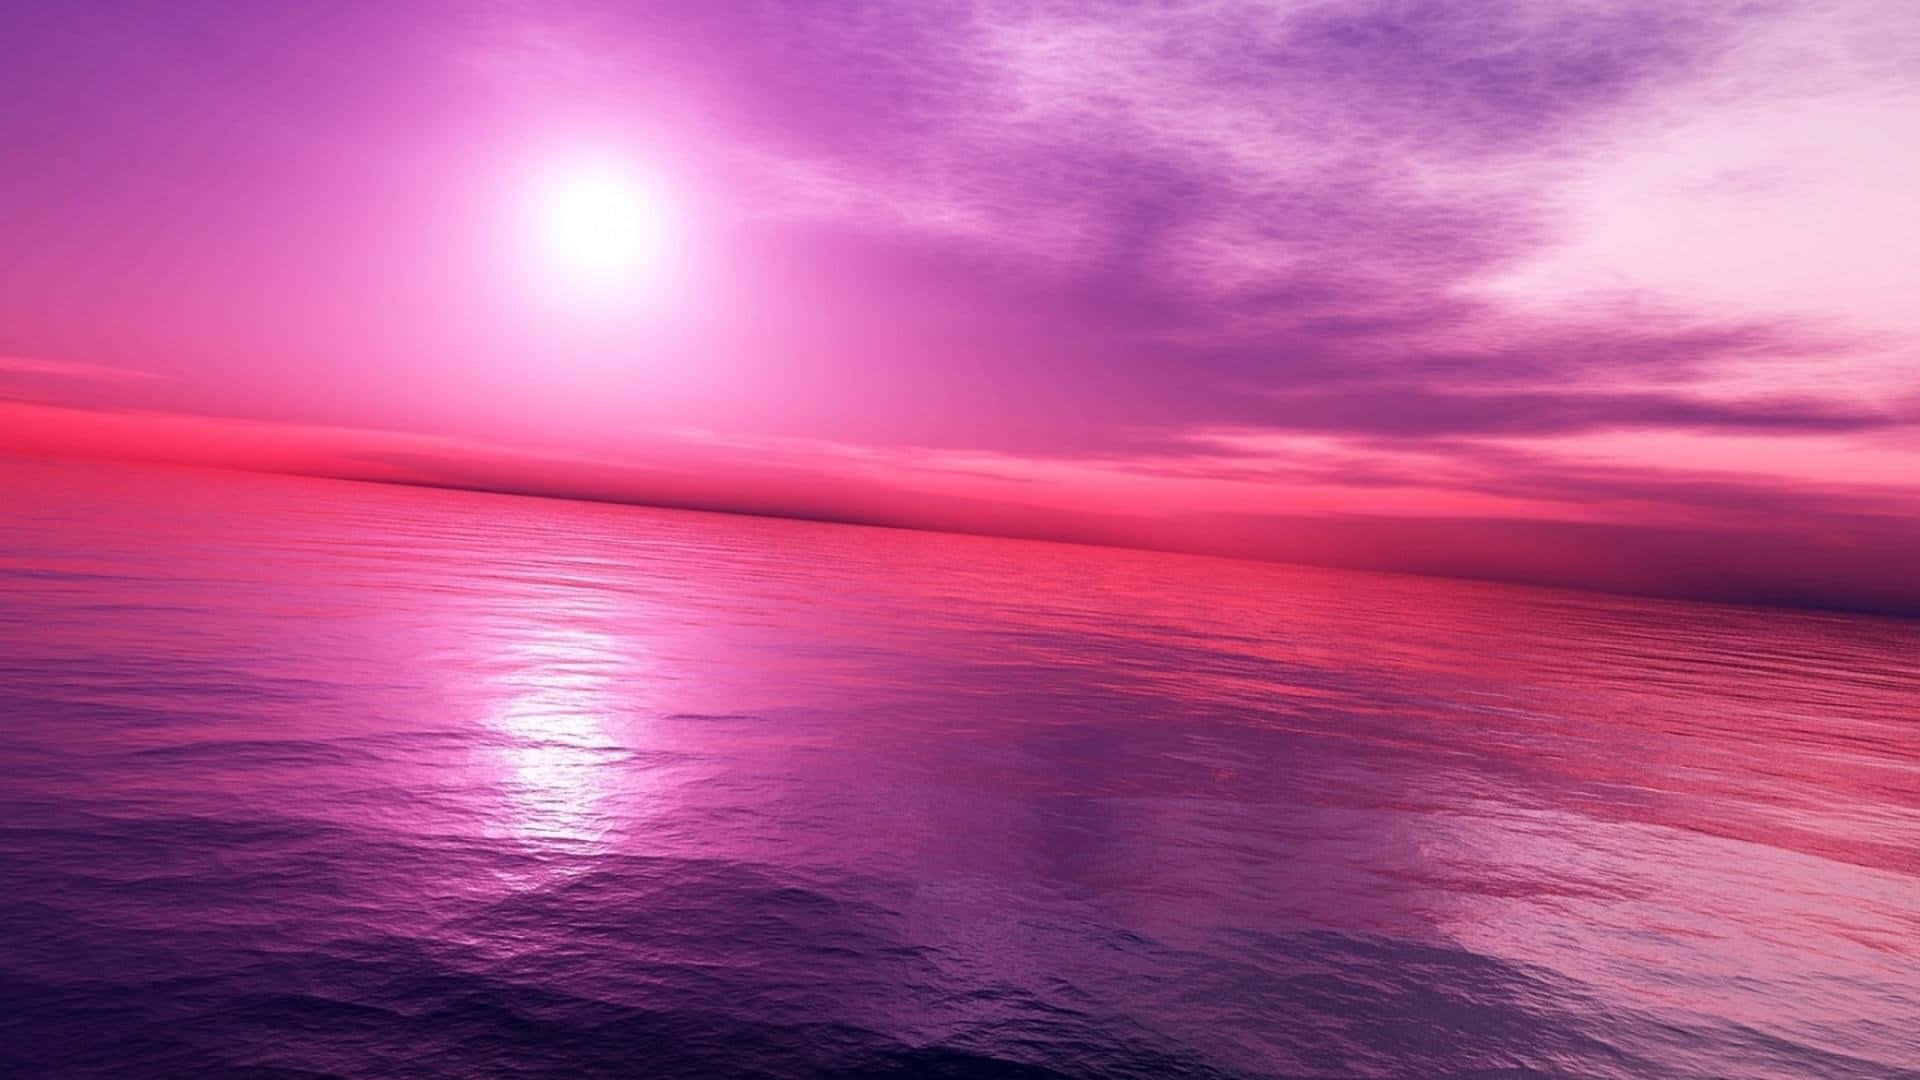 Tranquil Pink Sky at Sunset Wallpaper